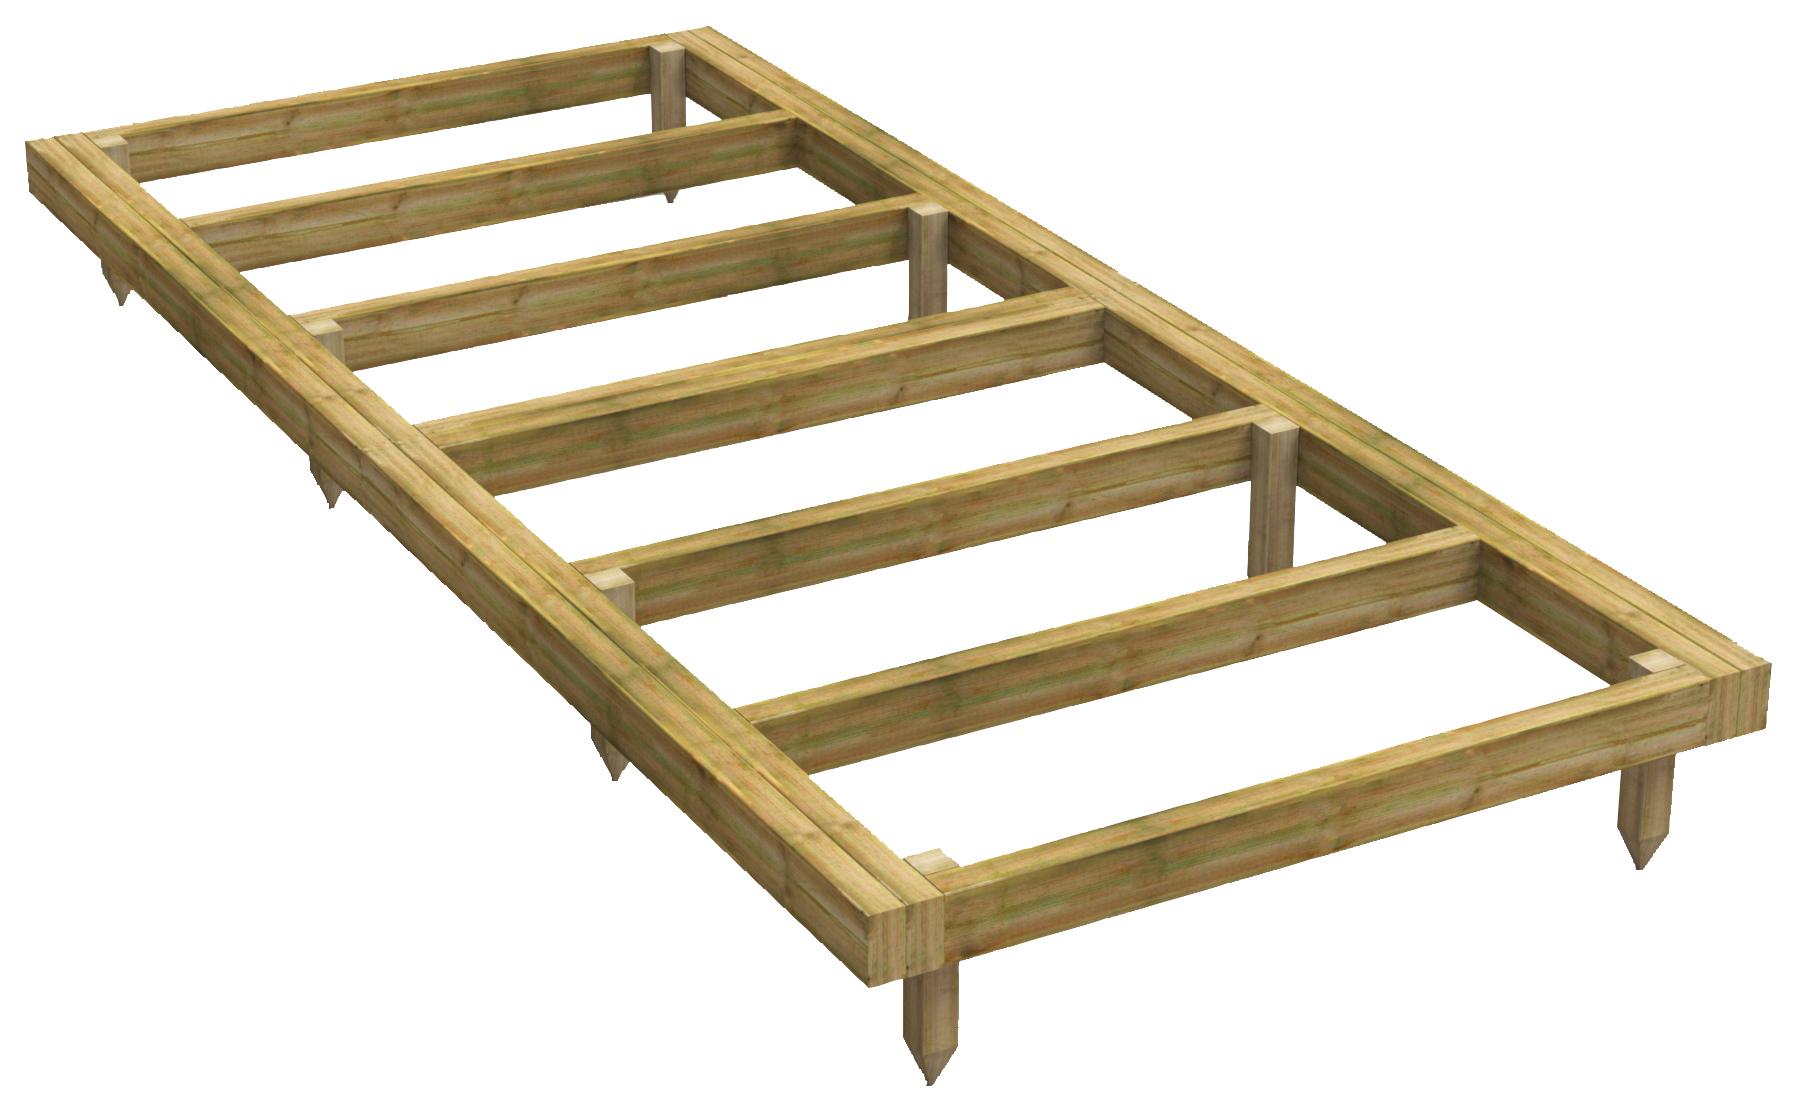 Power Sheds Pressure Treated Garden Building Base Kit - 4 x 10ft